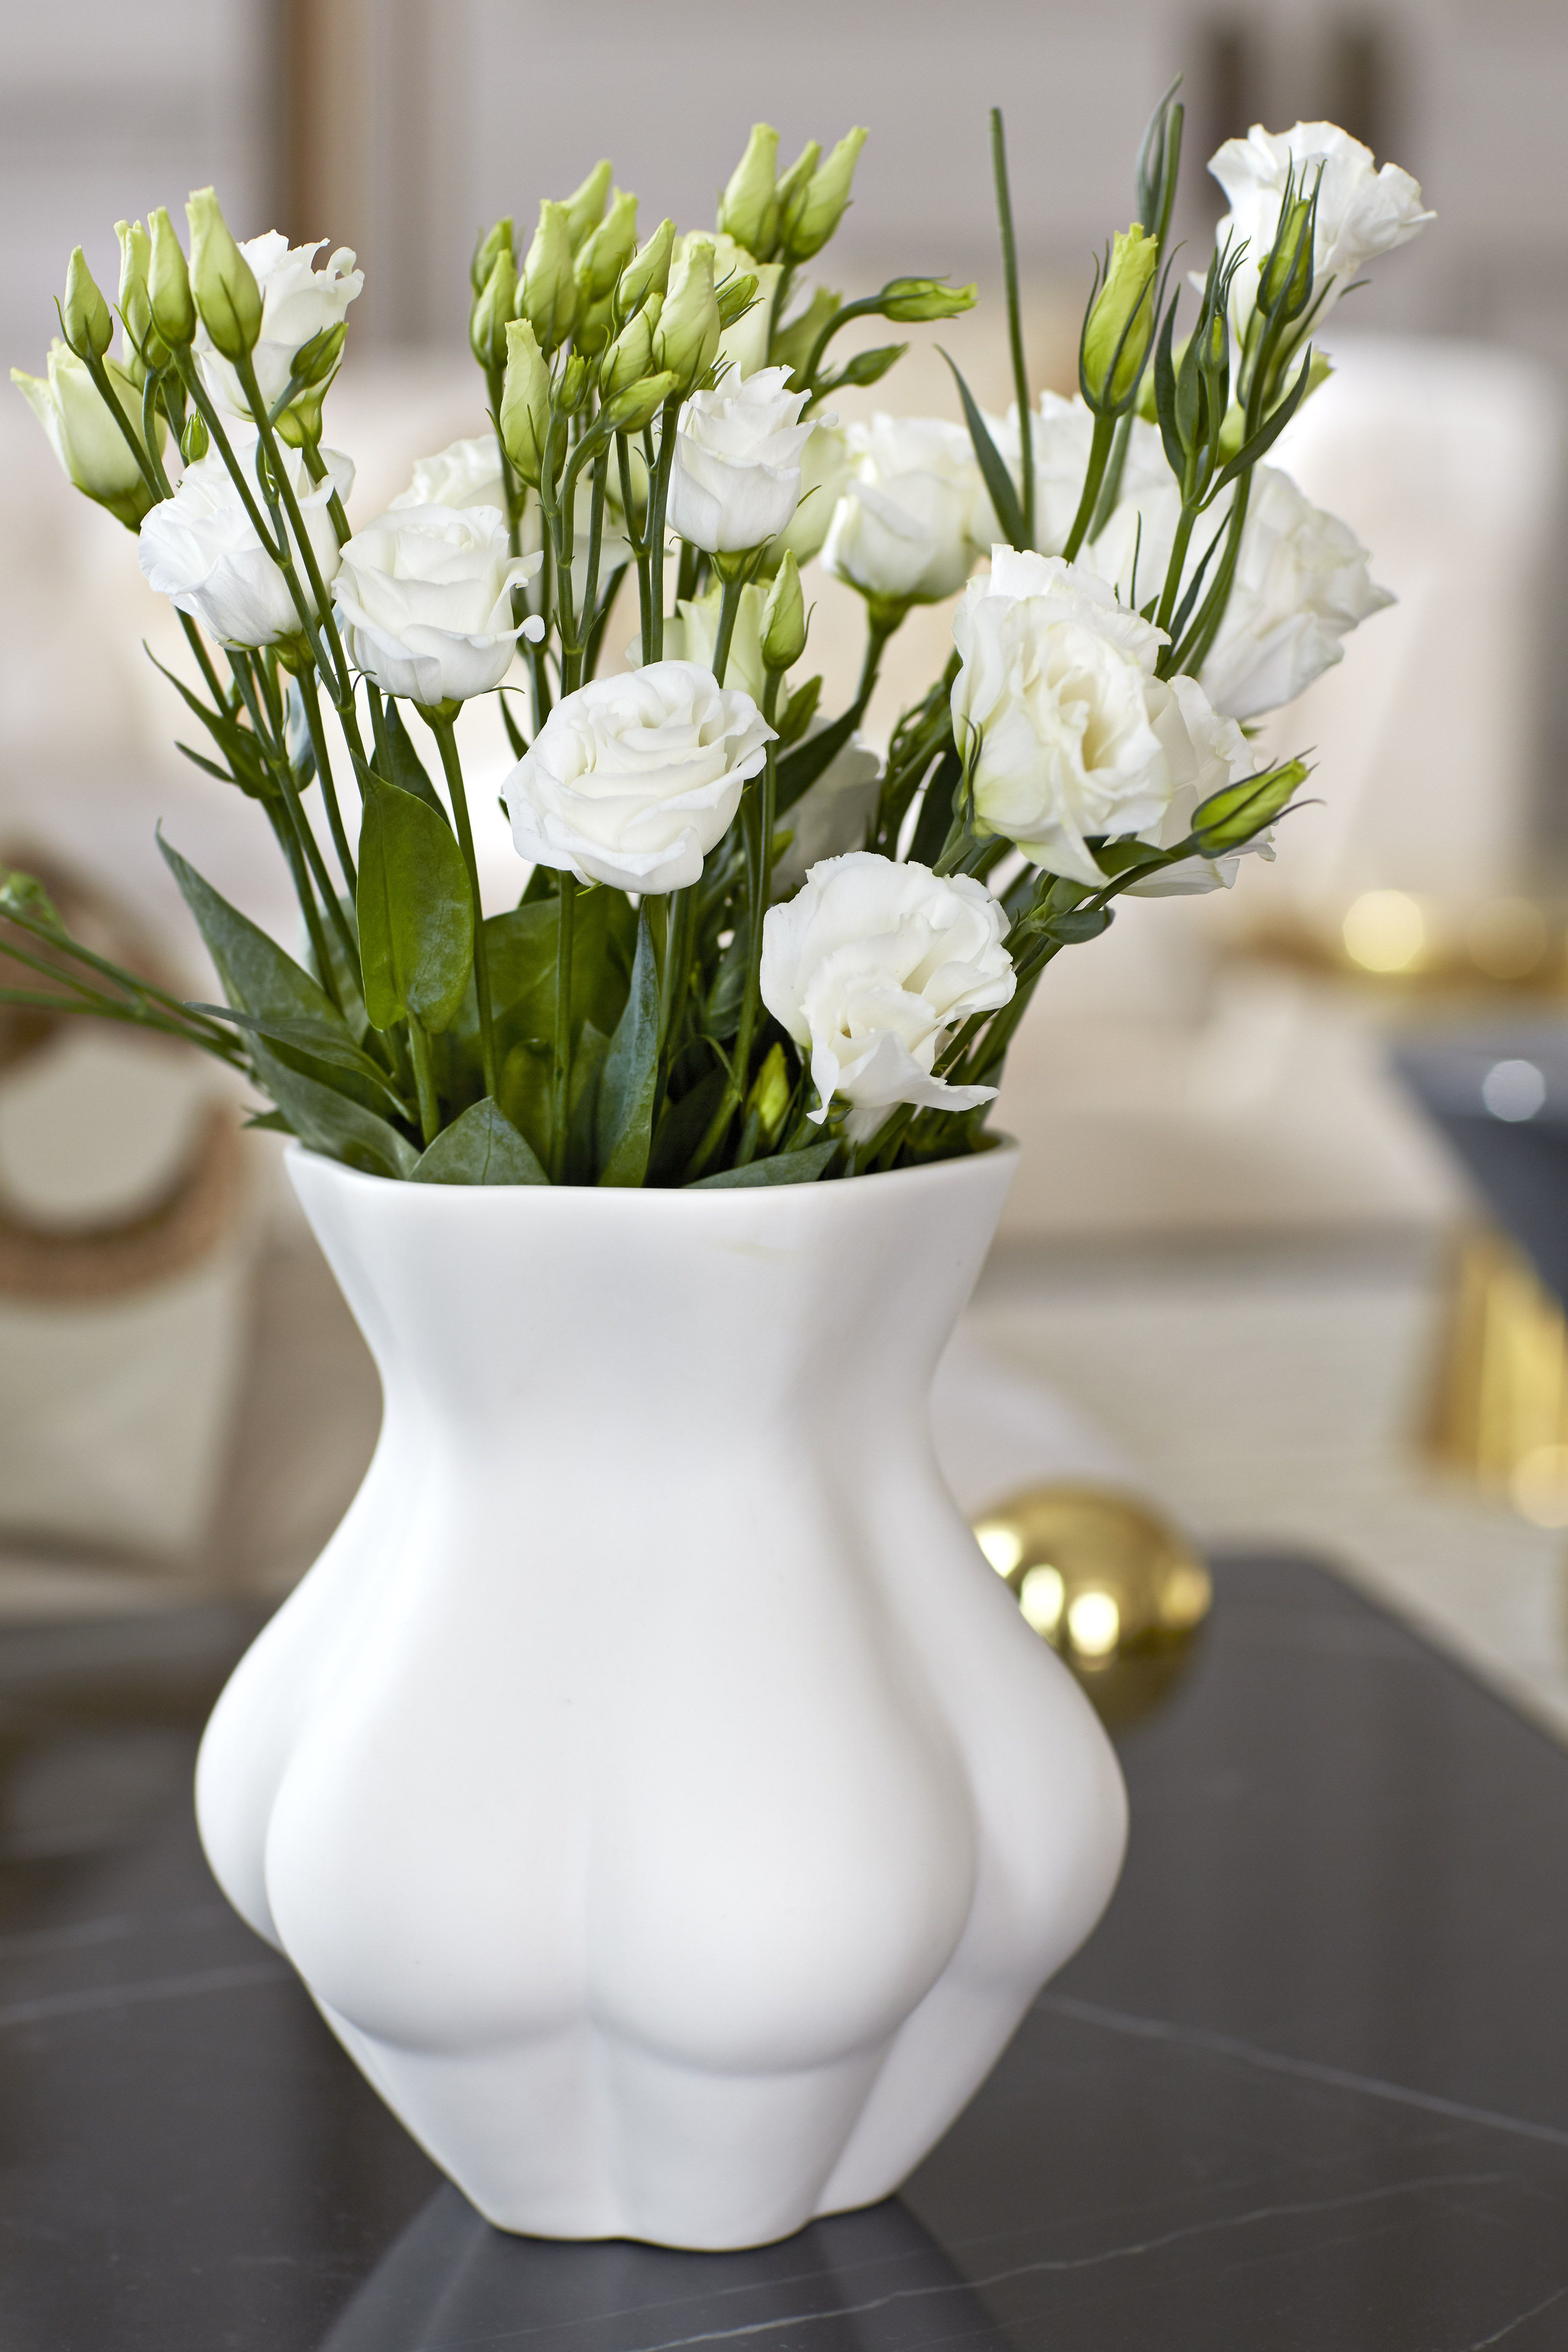 15 Stylish Jonathan Adler Lips Vase 2024 free download jonathan adler lips vase of kikis derriere vase home sweet gallery pinterest jonathan in jonathan adler kikis derriere vase a feminine piece of porcelain that she can store her flowers in